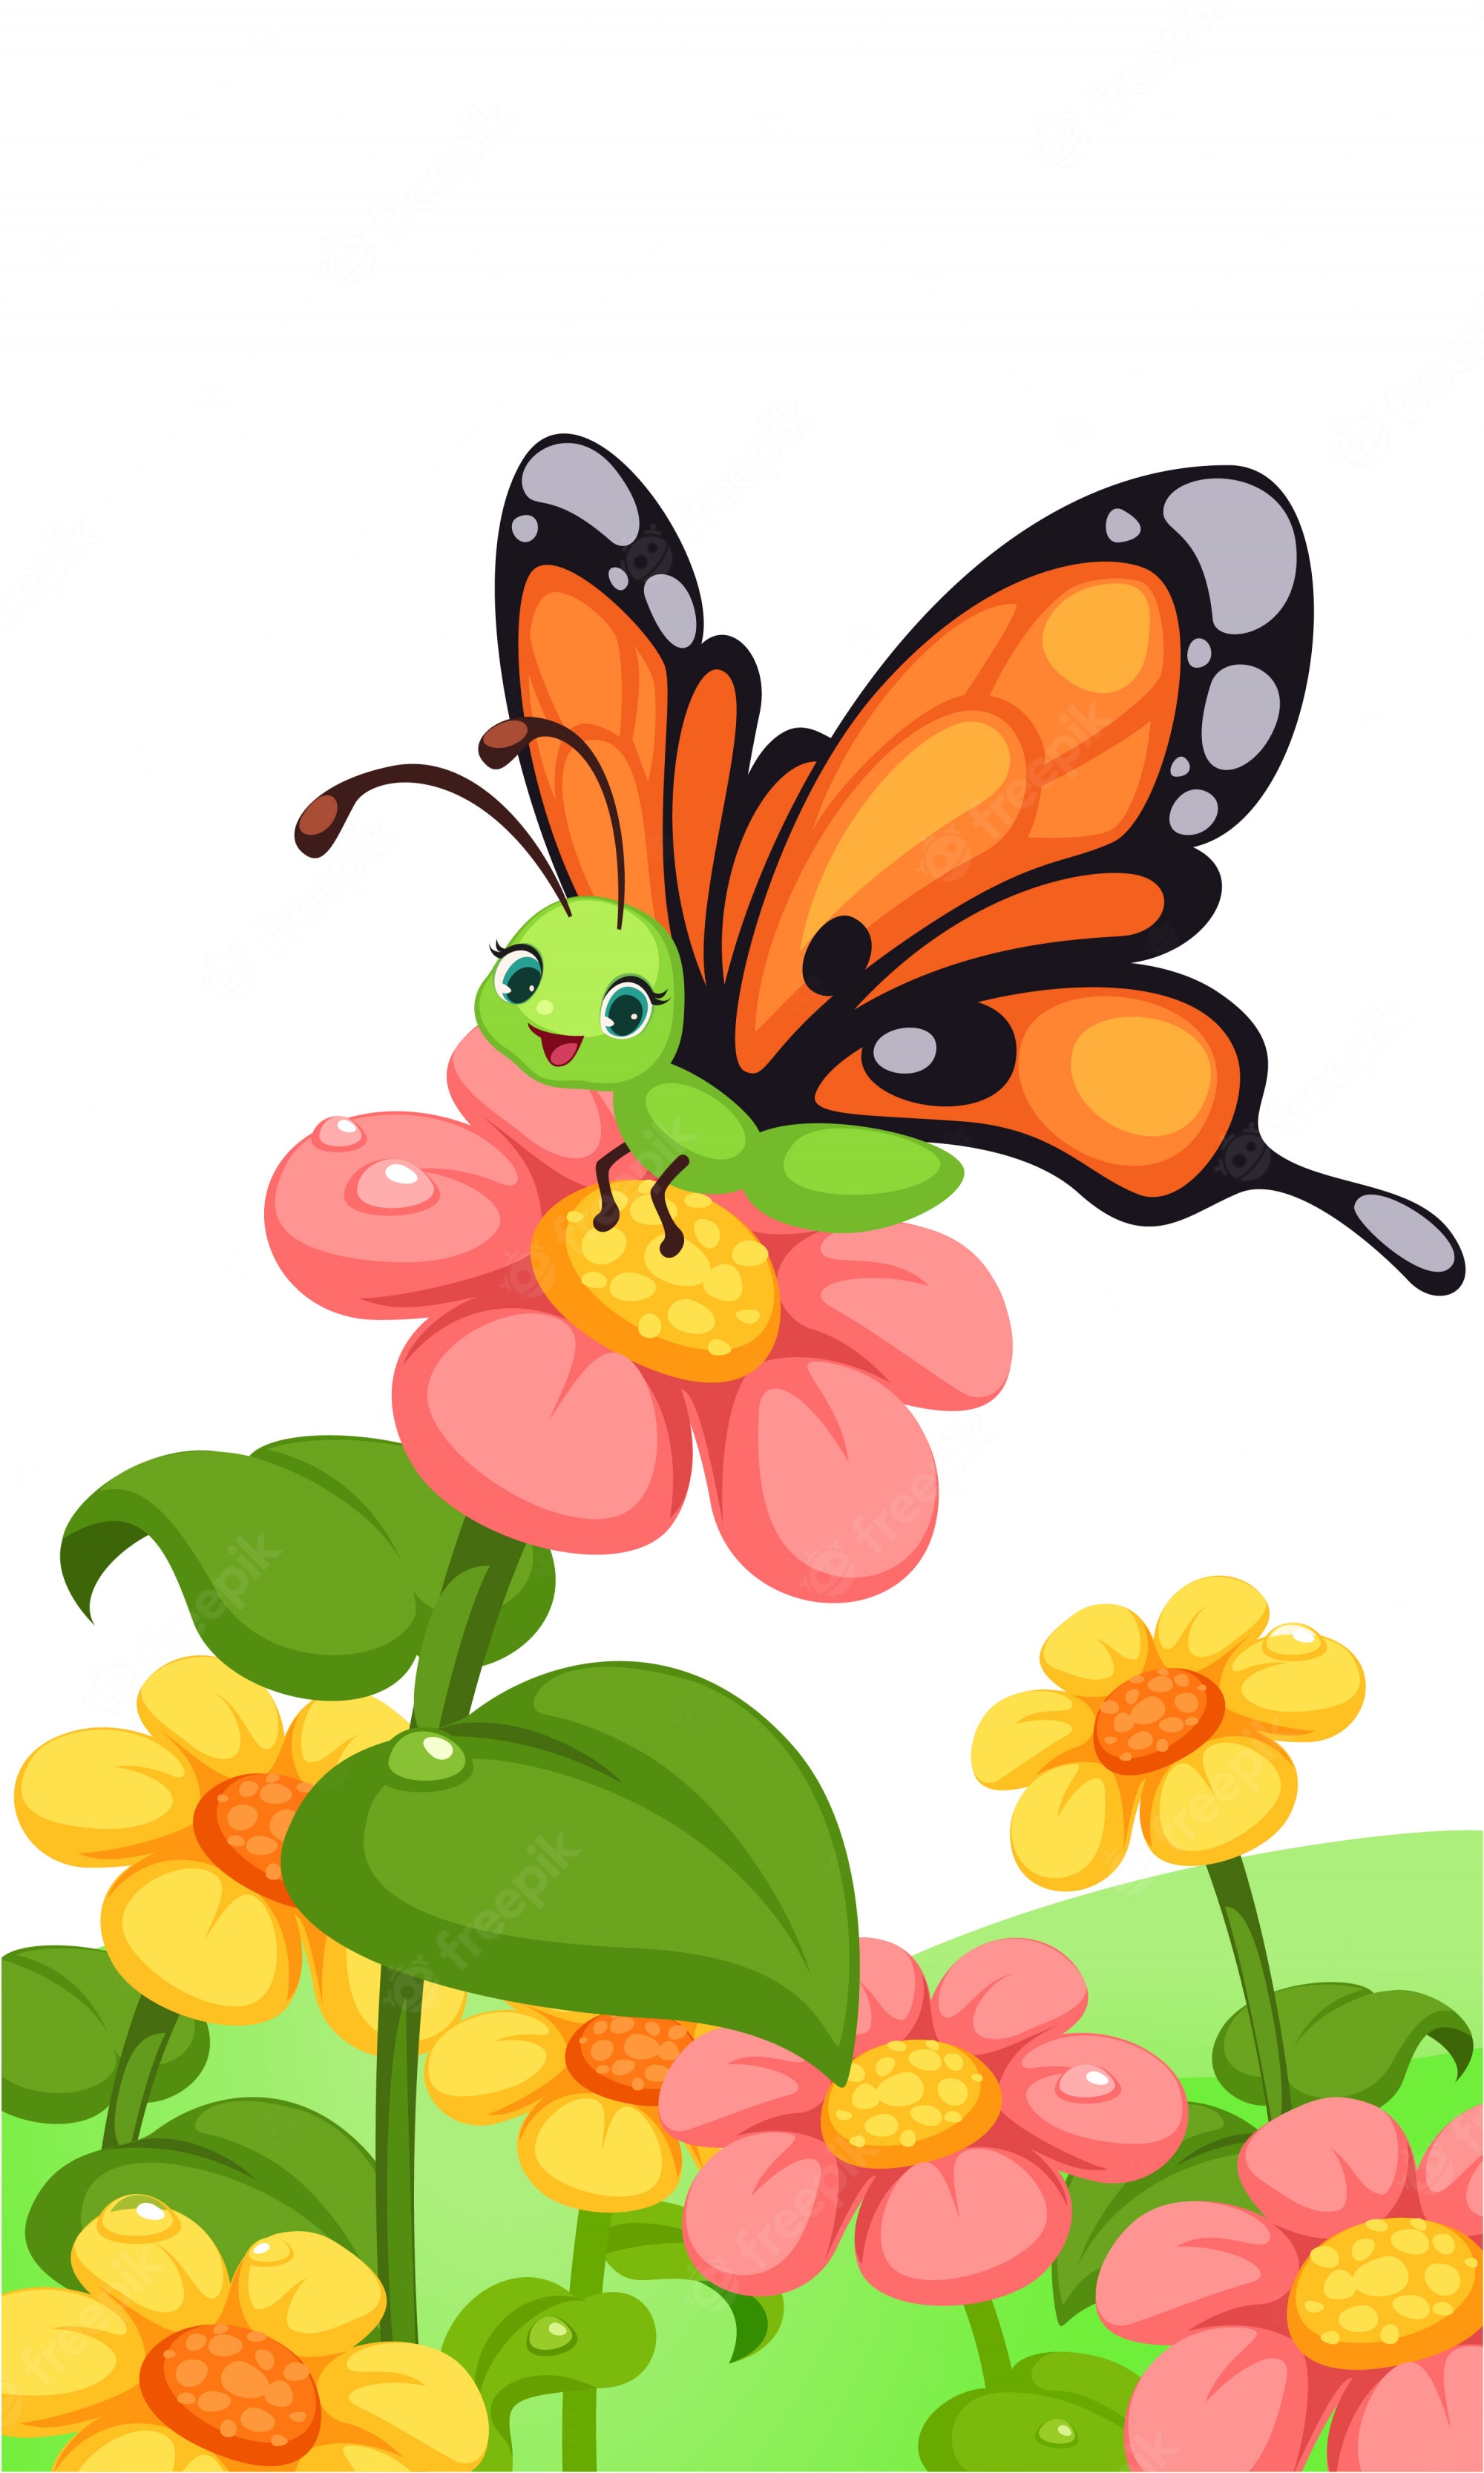 Monarch butterfly cartoon Image. Free Vectors, & PSD